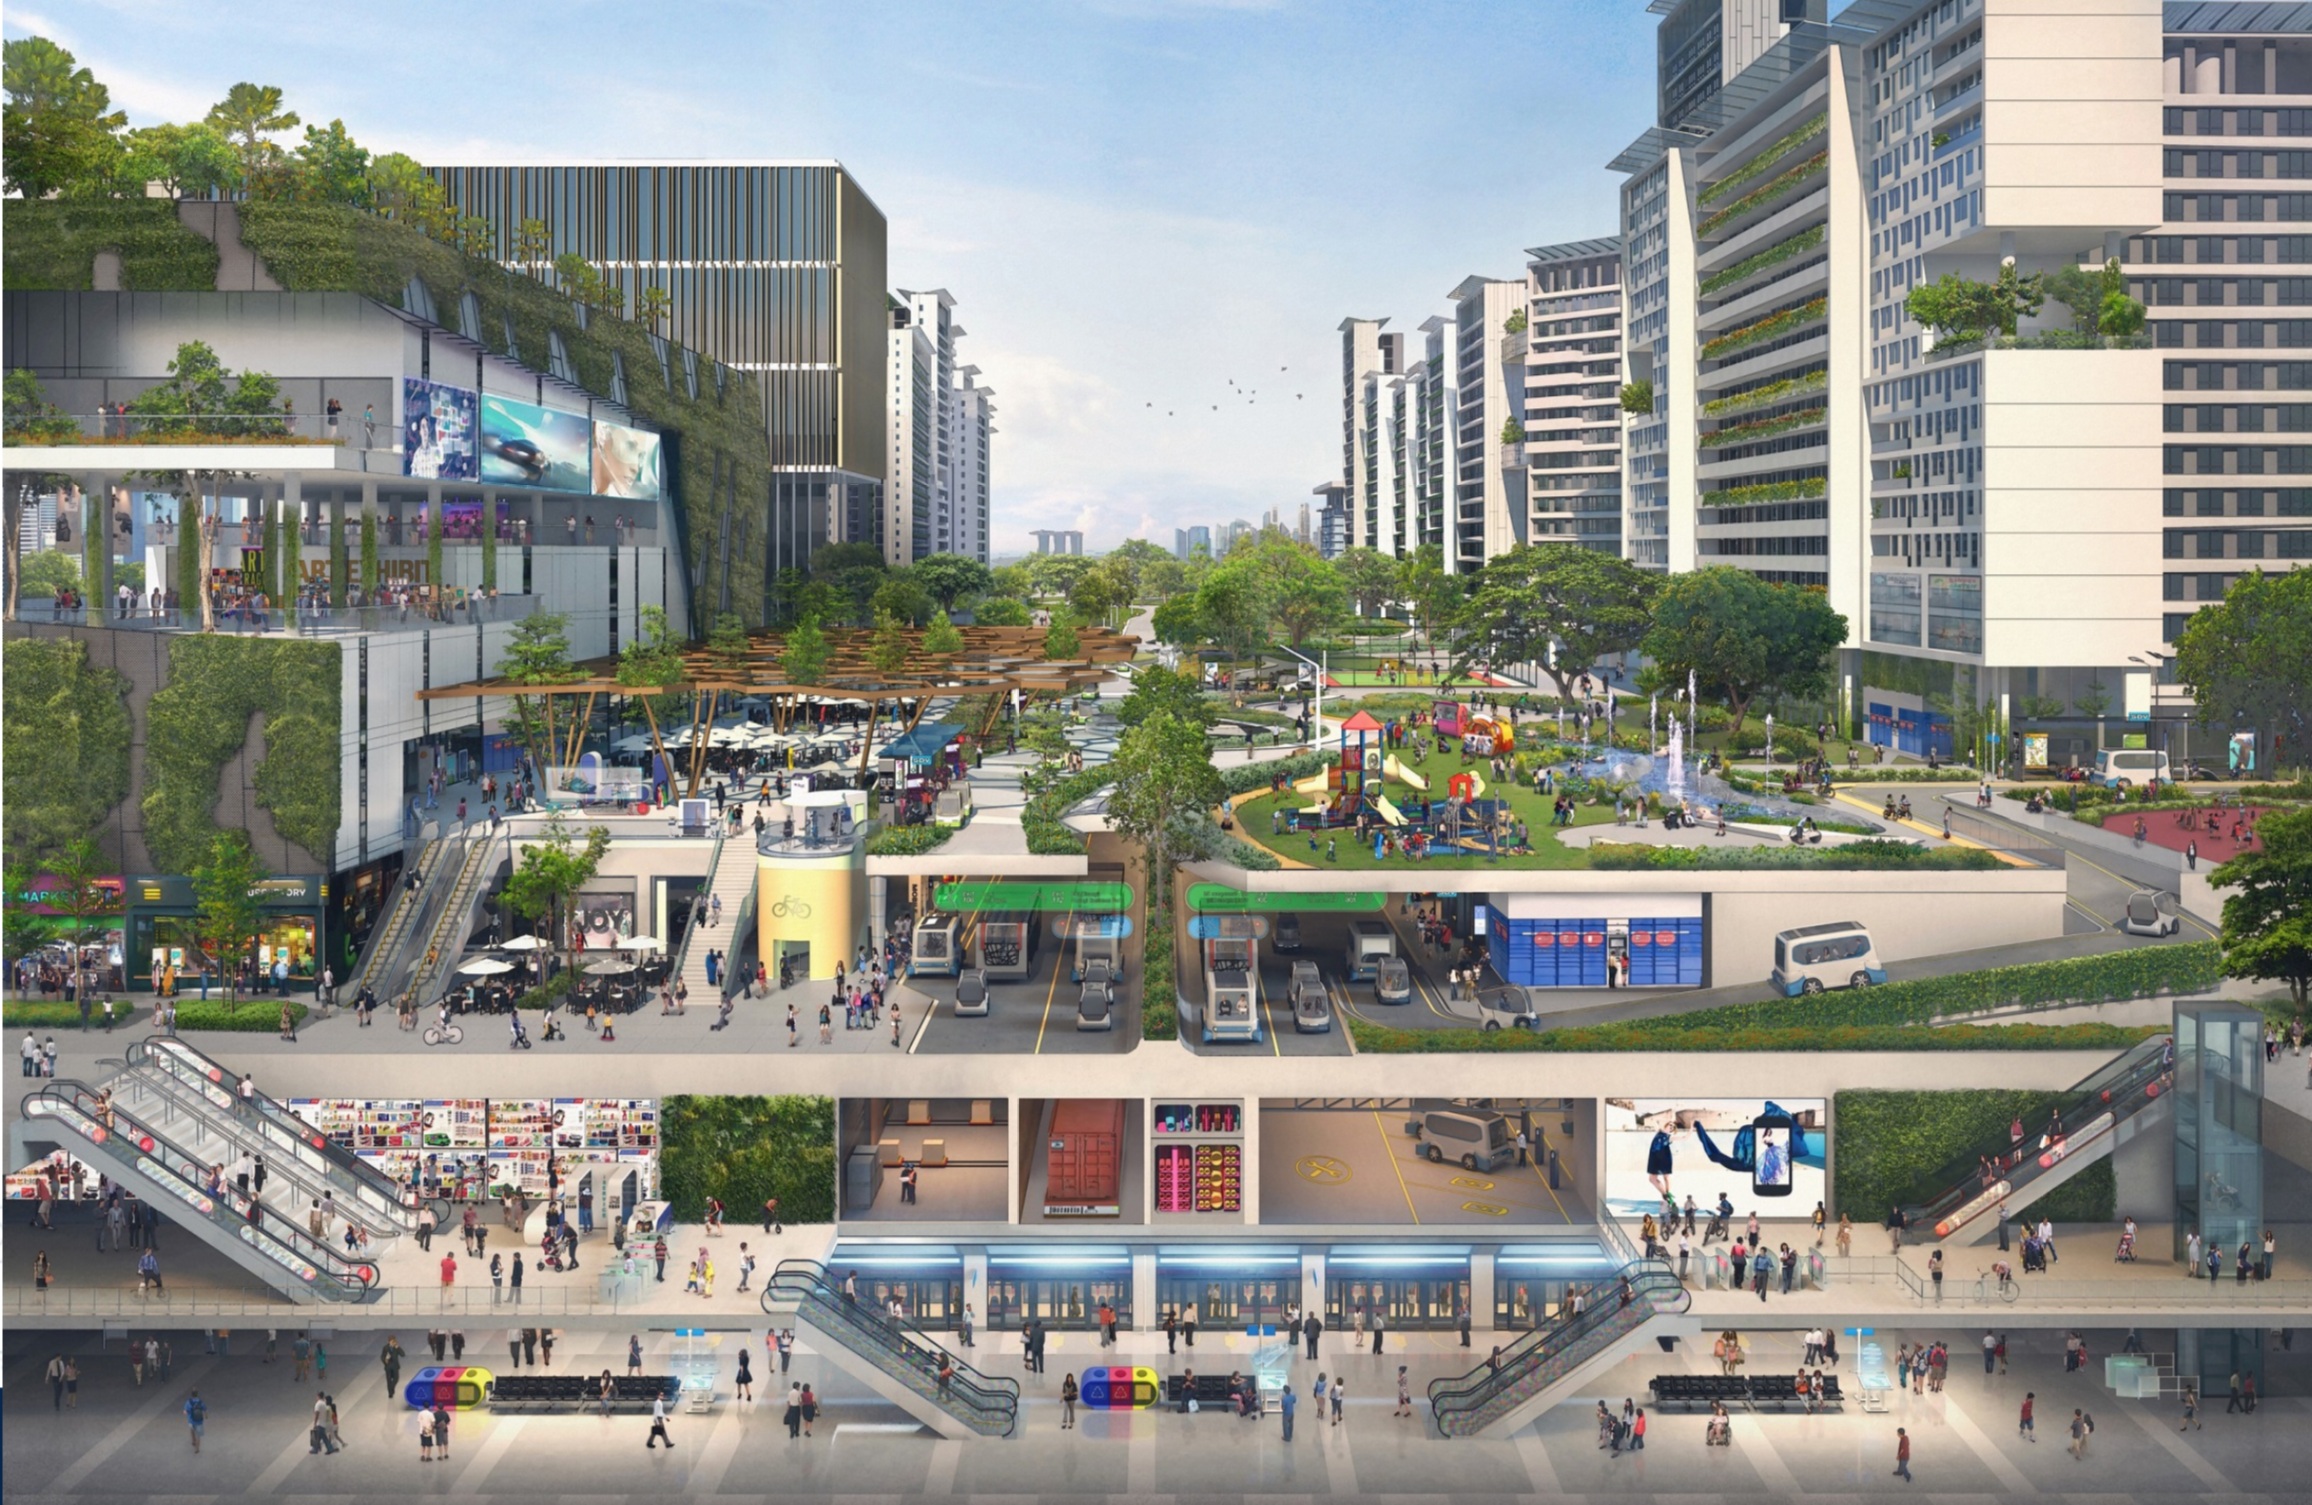  A concept of the future town center with AV, retrieved from: Singapore Land Transport Authority 